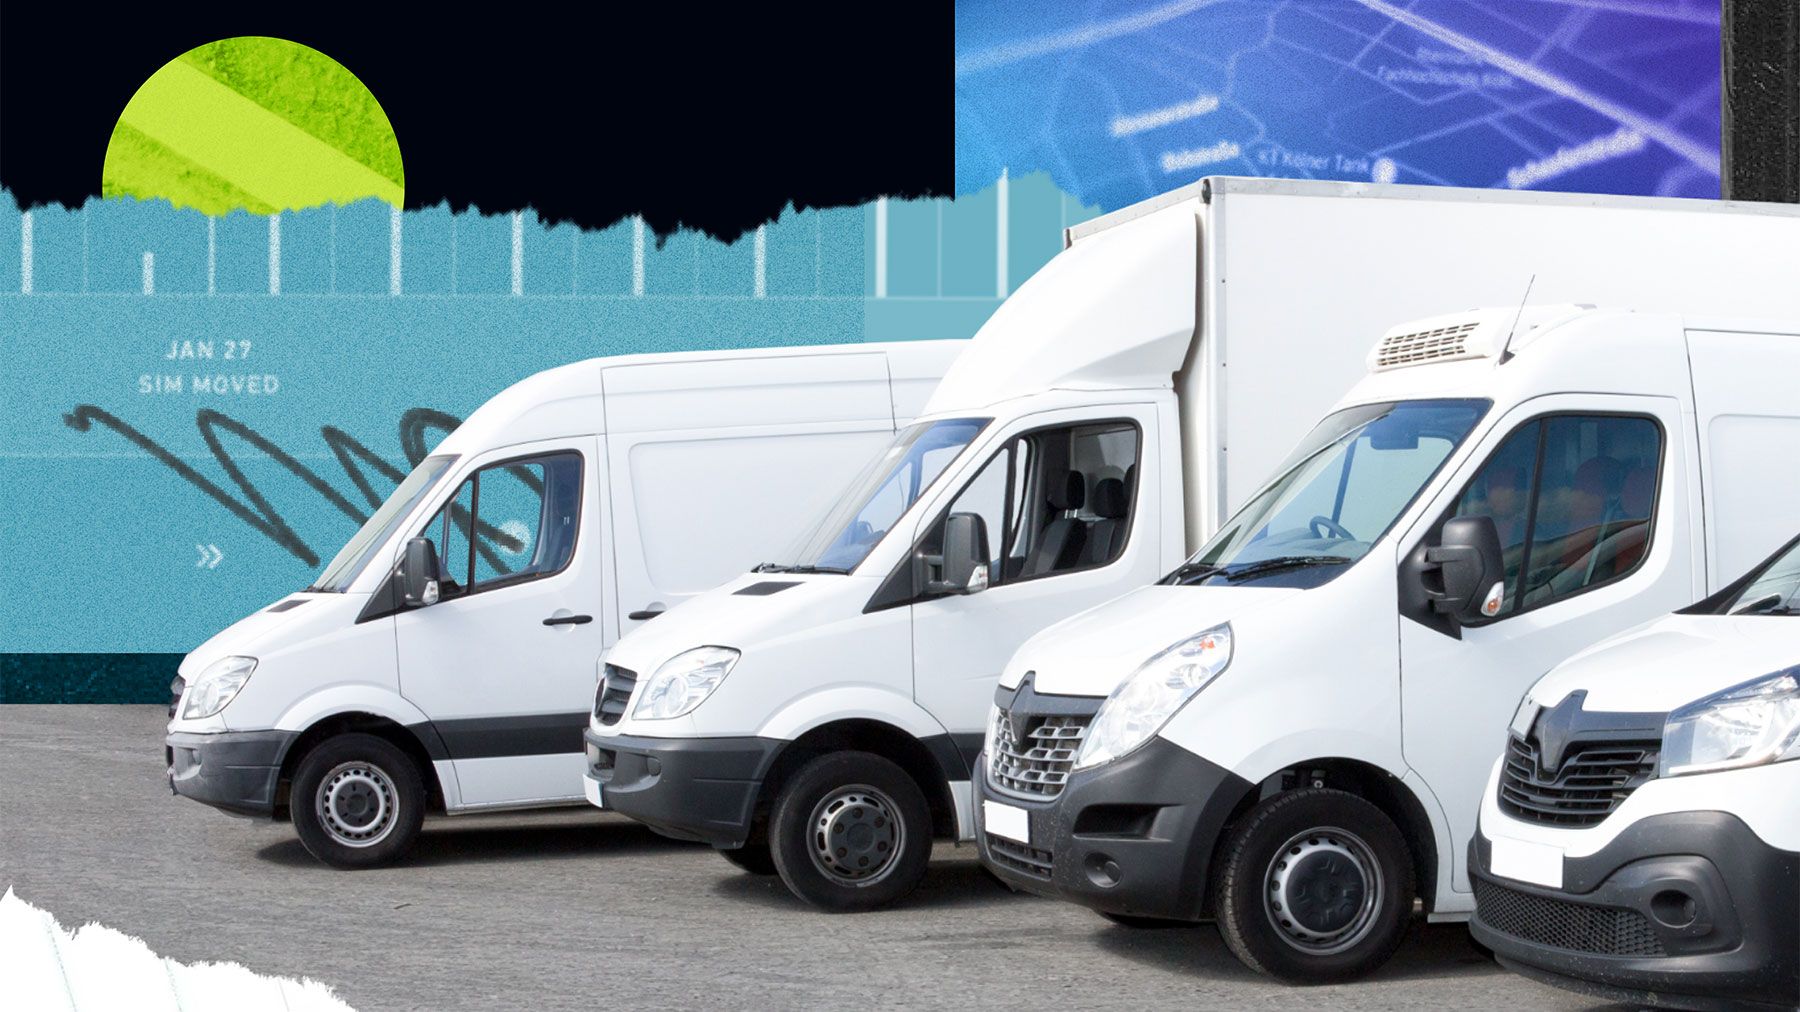 Fleet of white delivery vehicles